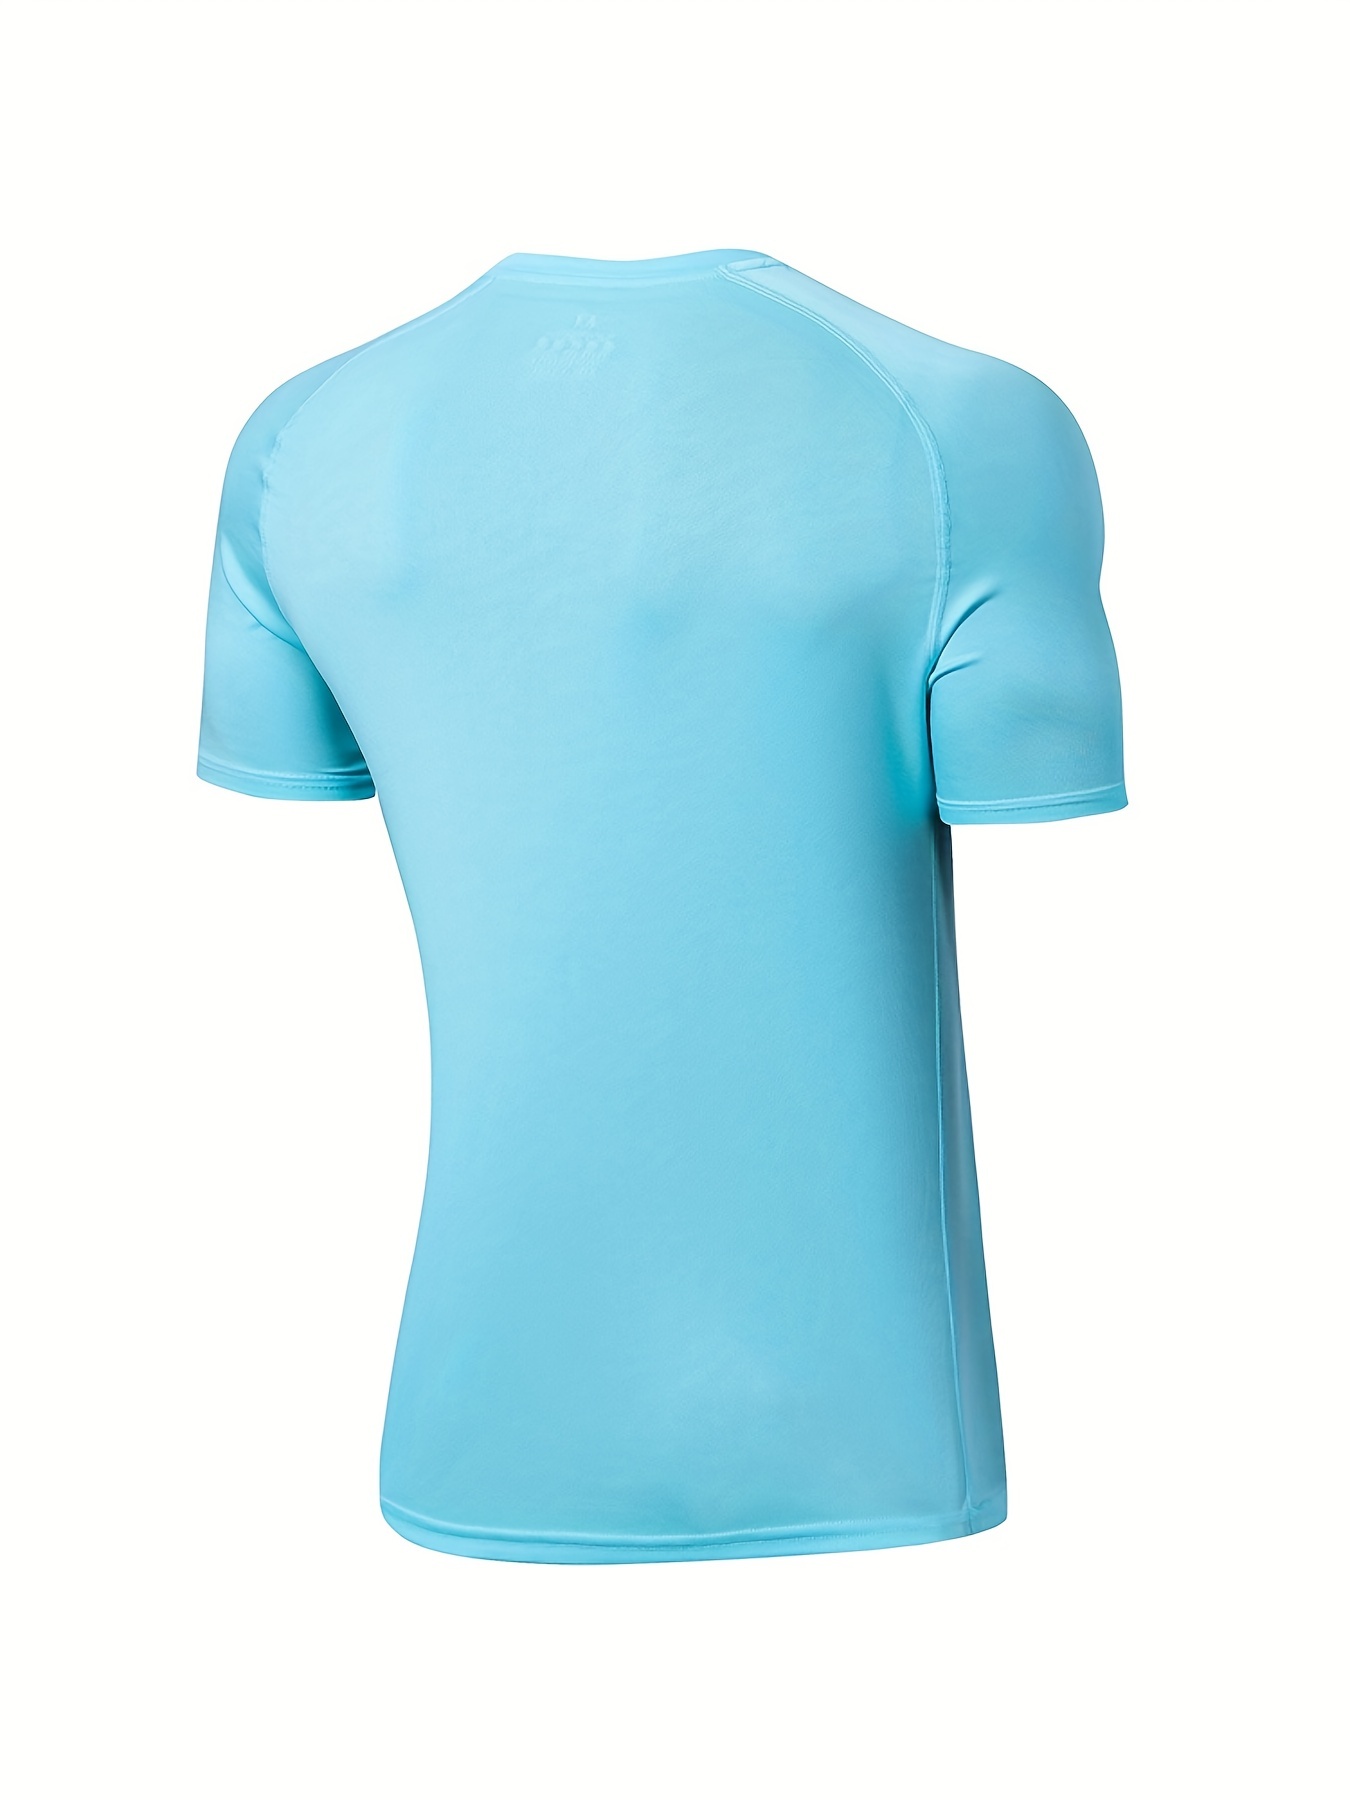 Men's UPF 50+ Sun Protection Shirt with Assorted Colors, Swim Shirt Quick Dry Fishing Beach T Shirts Moisture Wicking Outdoor Active Sports Shirt